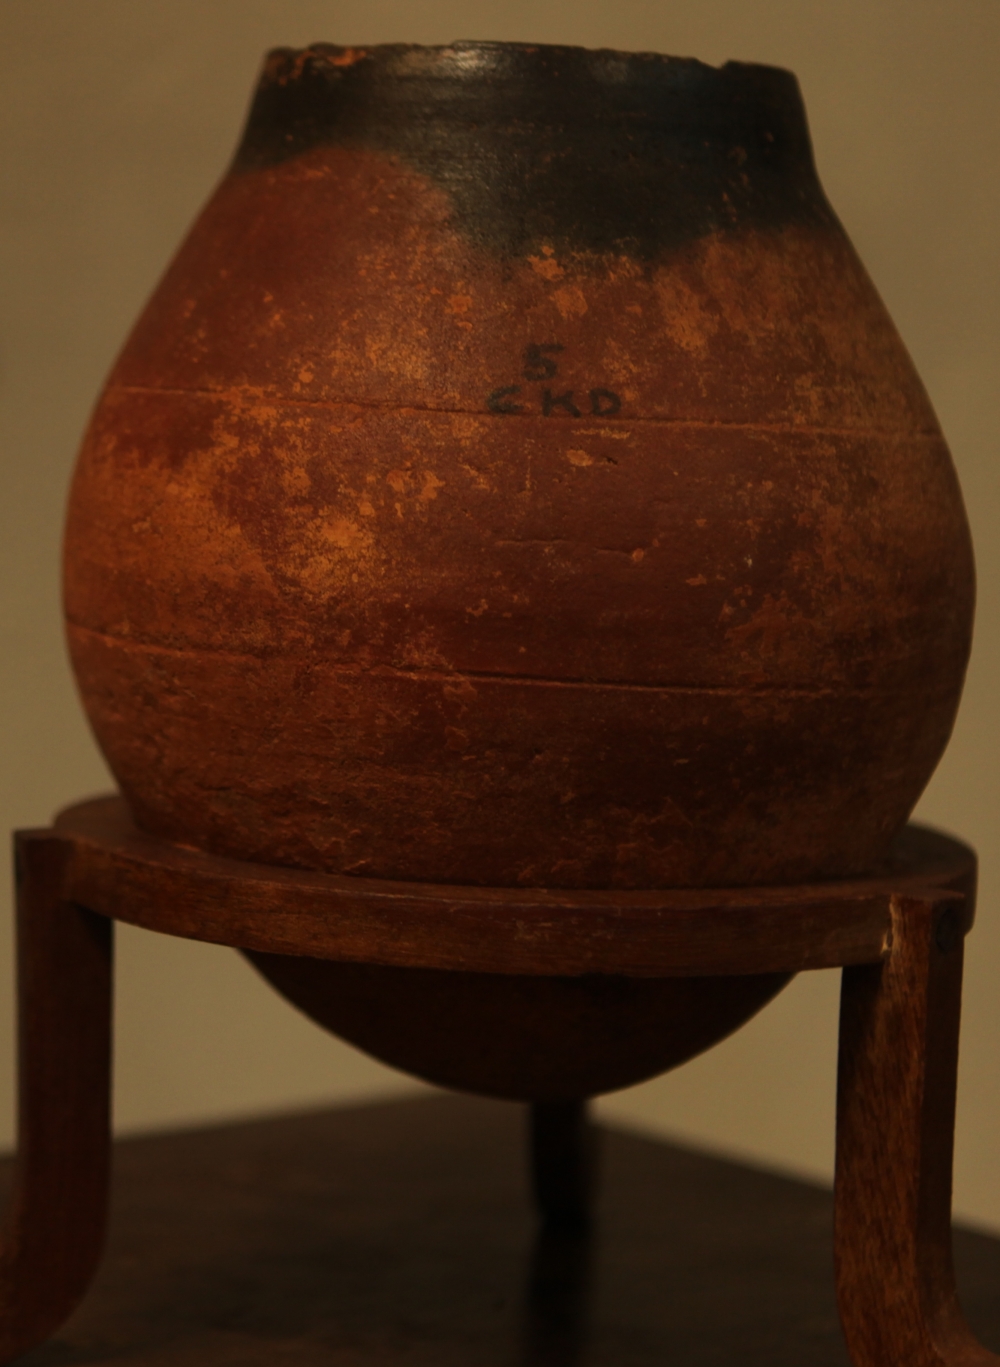 Black and Red Ware, Chekkad, kept at the Shaktan Tampuran Museum, Thrissur Courtesy: Jaseera C.M.2018